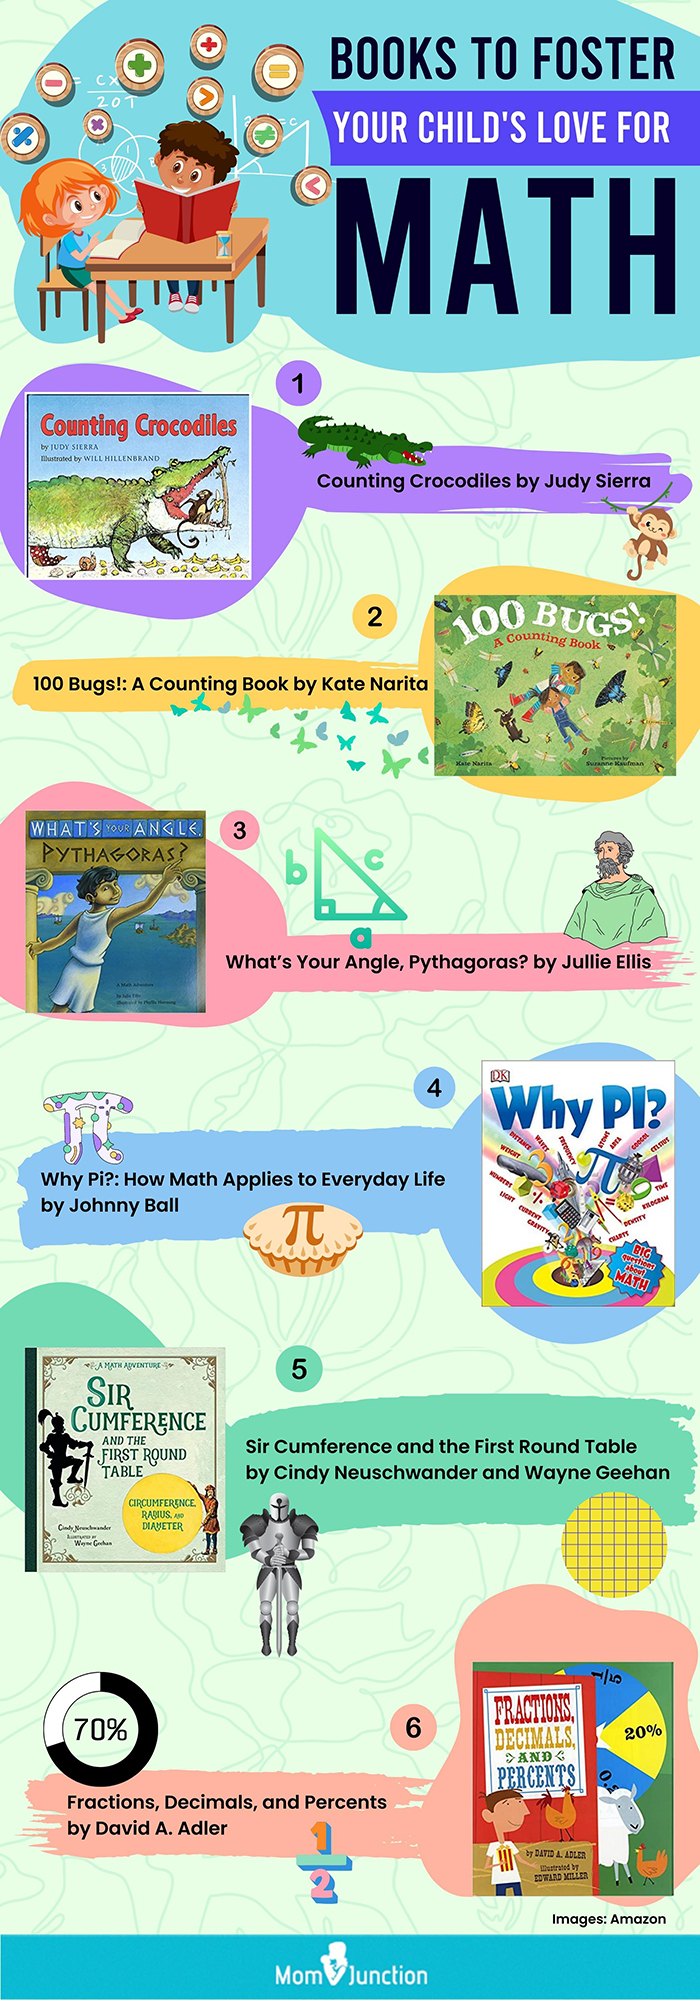 books to foster your child’s love for math [infographic]